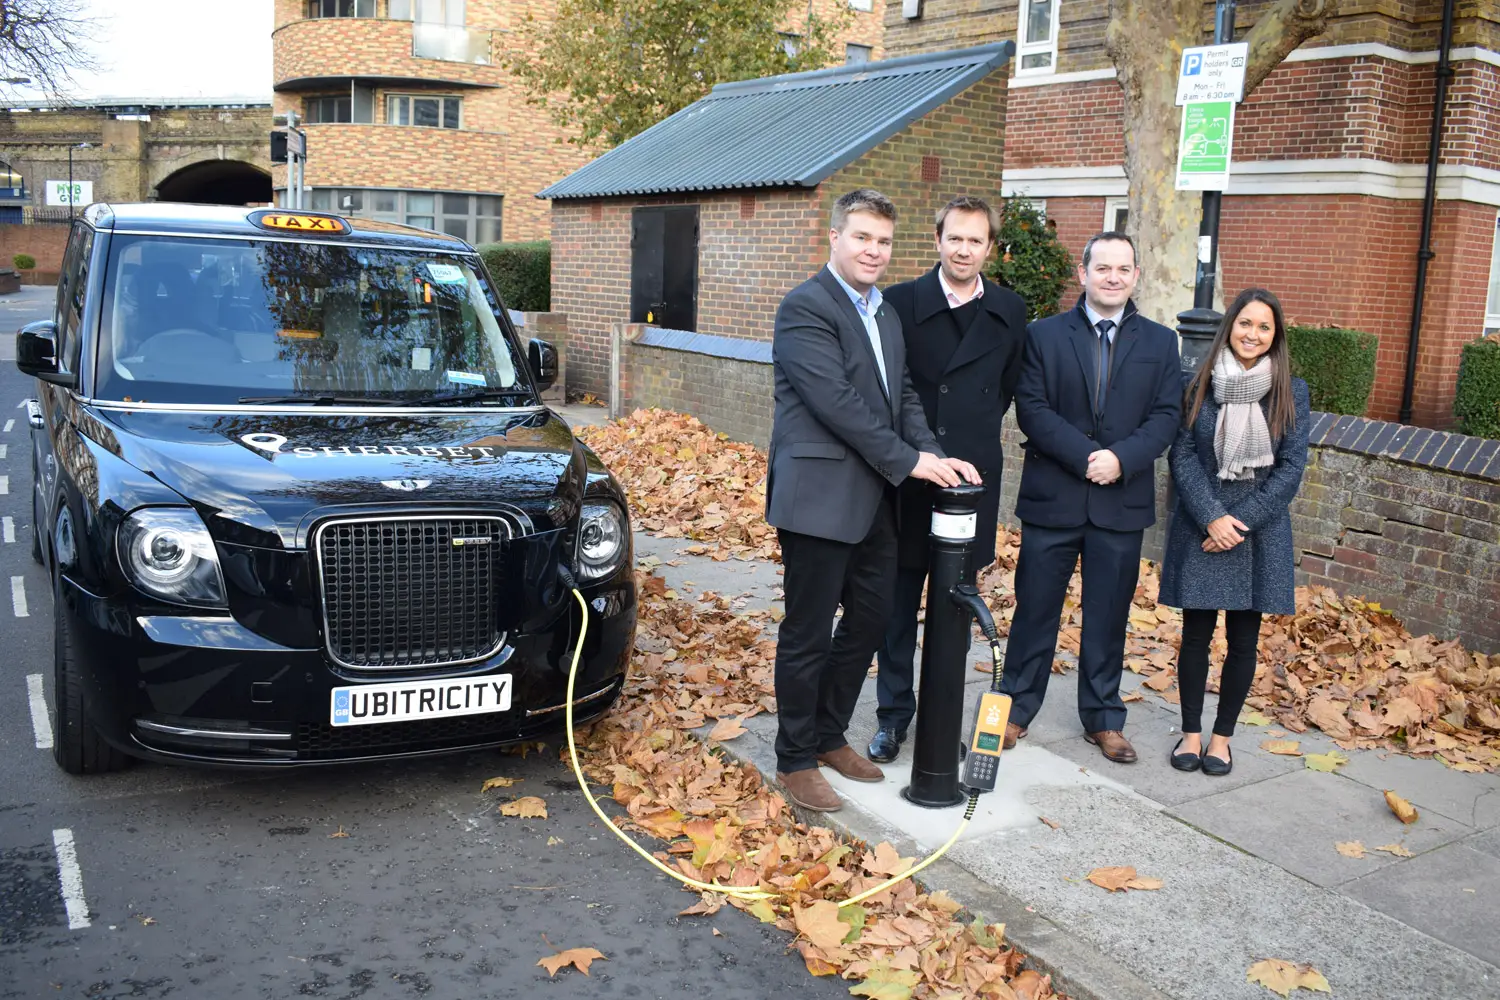 ubitricity's founder are celebrating the UK's first public lamppost charge point in London in 2018.